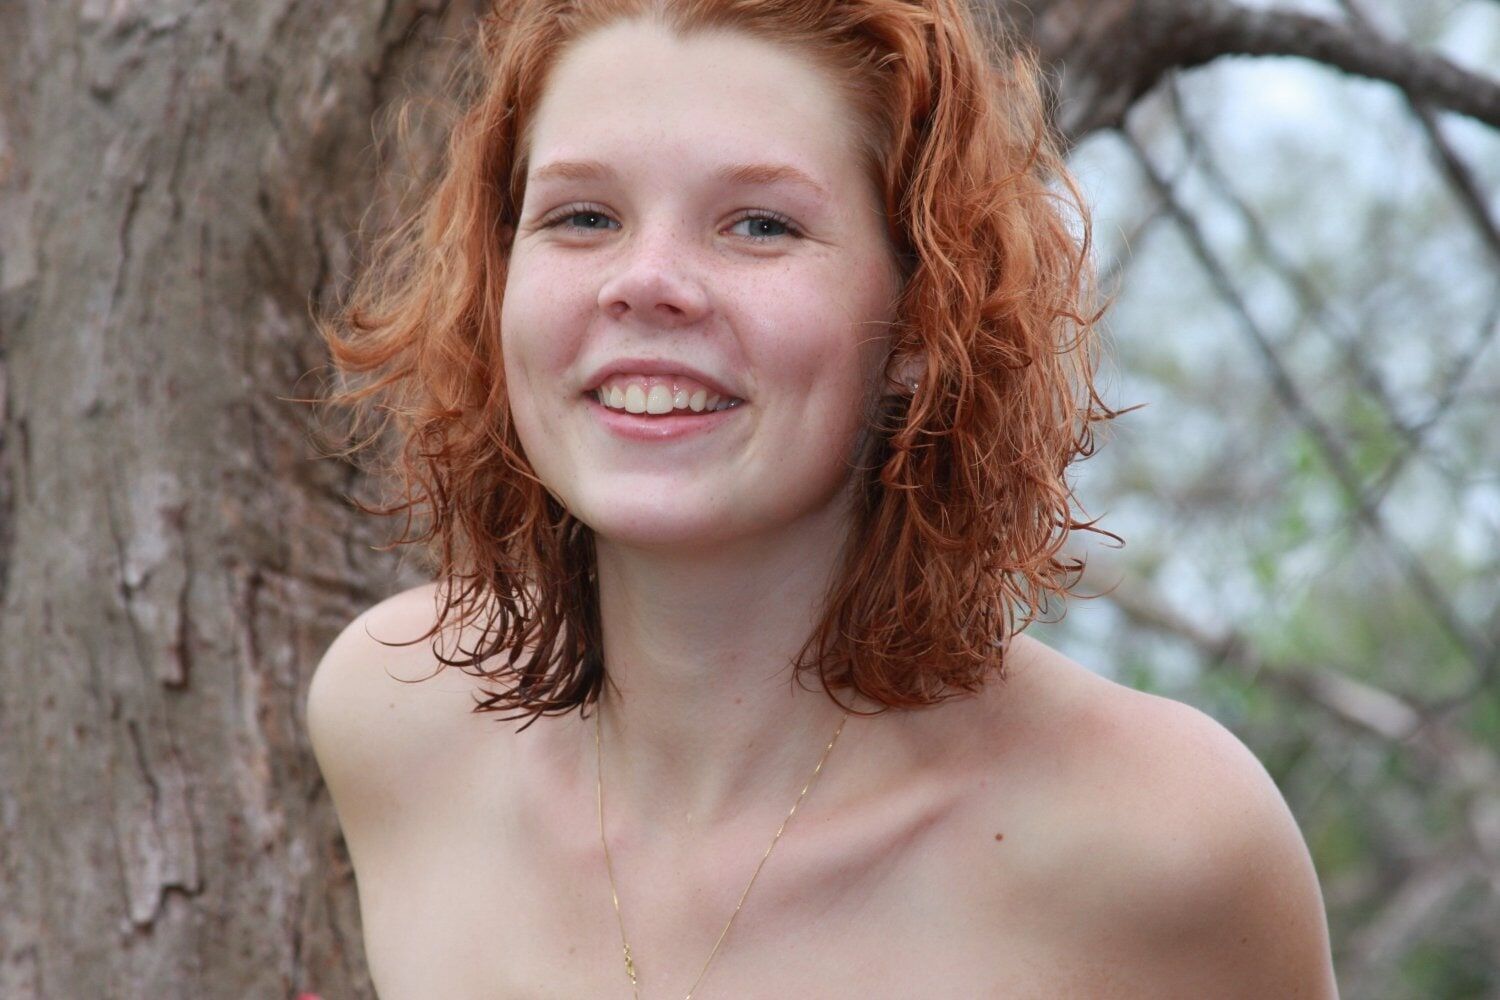 Gorgeous freckled redhead Tori posing nude in the beach